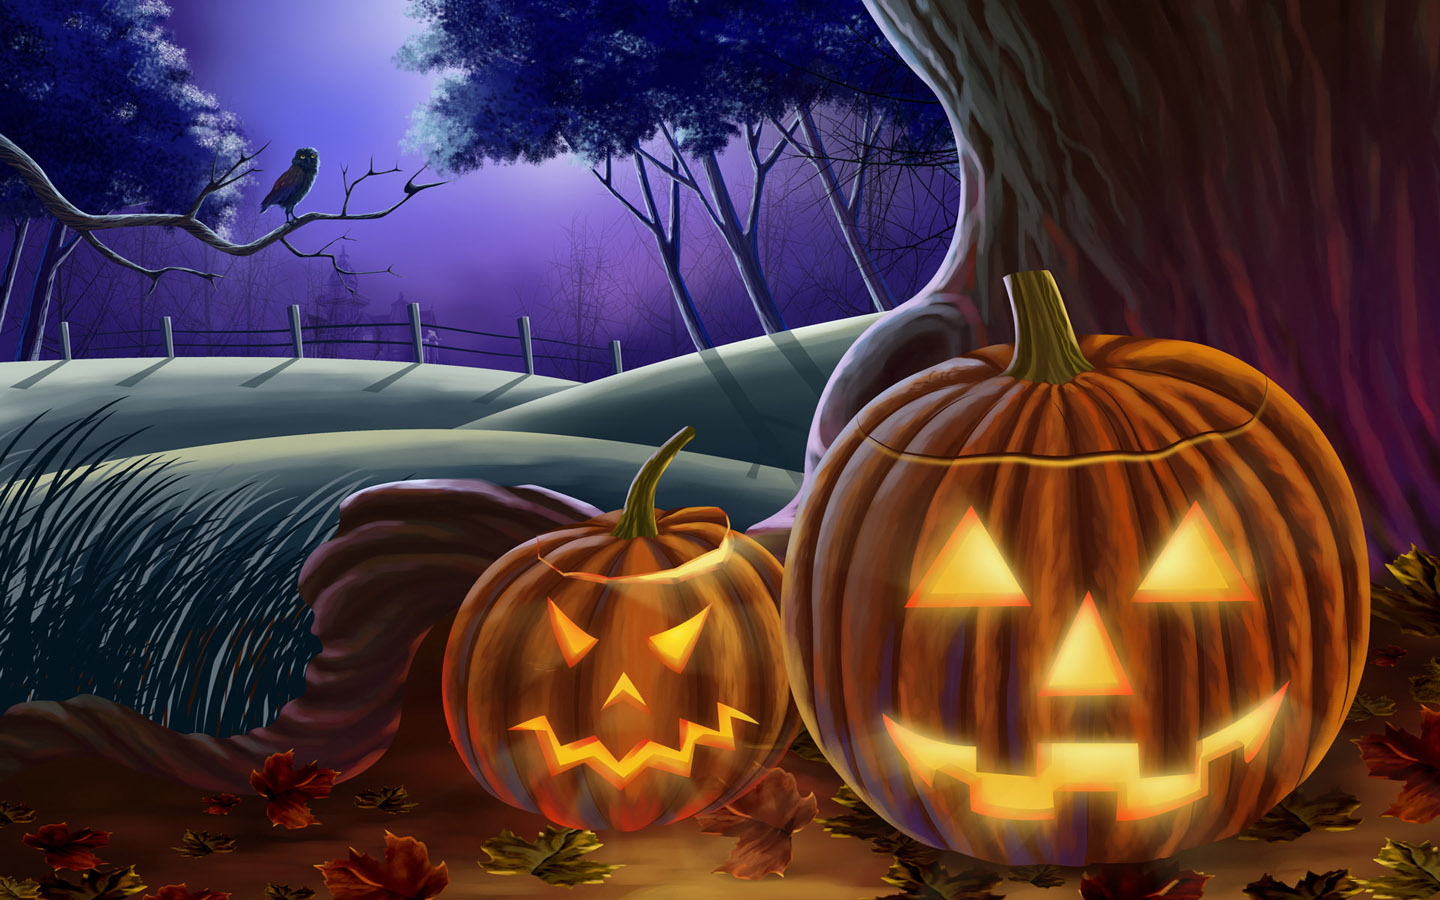 Scary Halloween HD Wallpaper Pumpkins Witches Spider Web